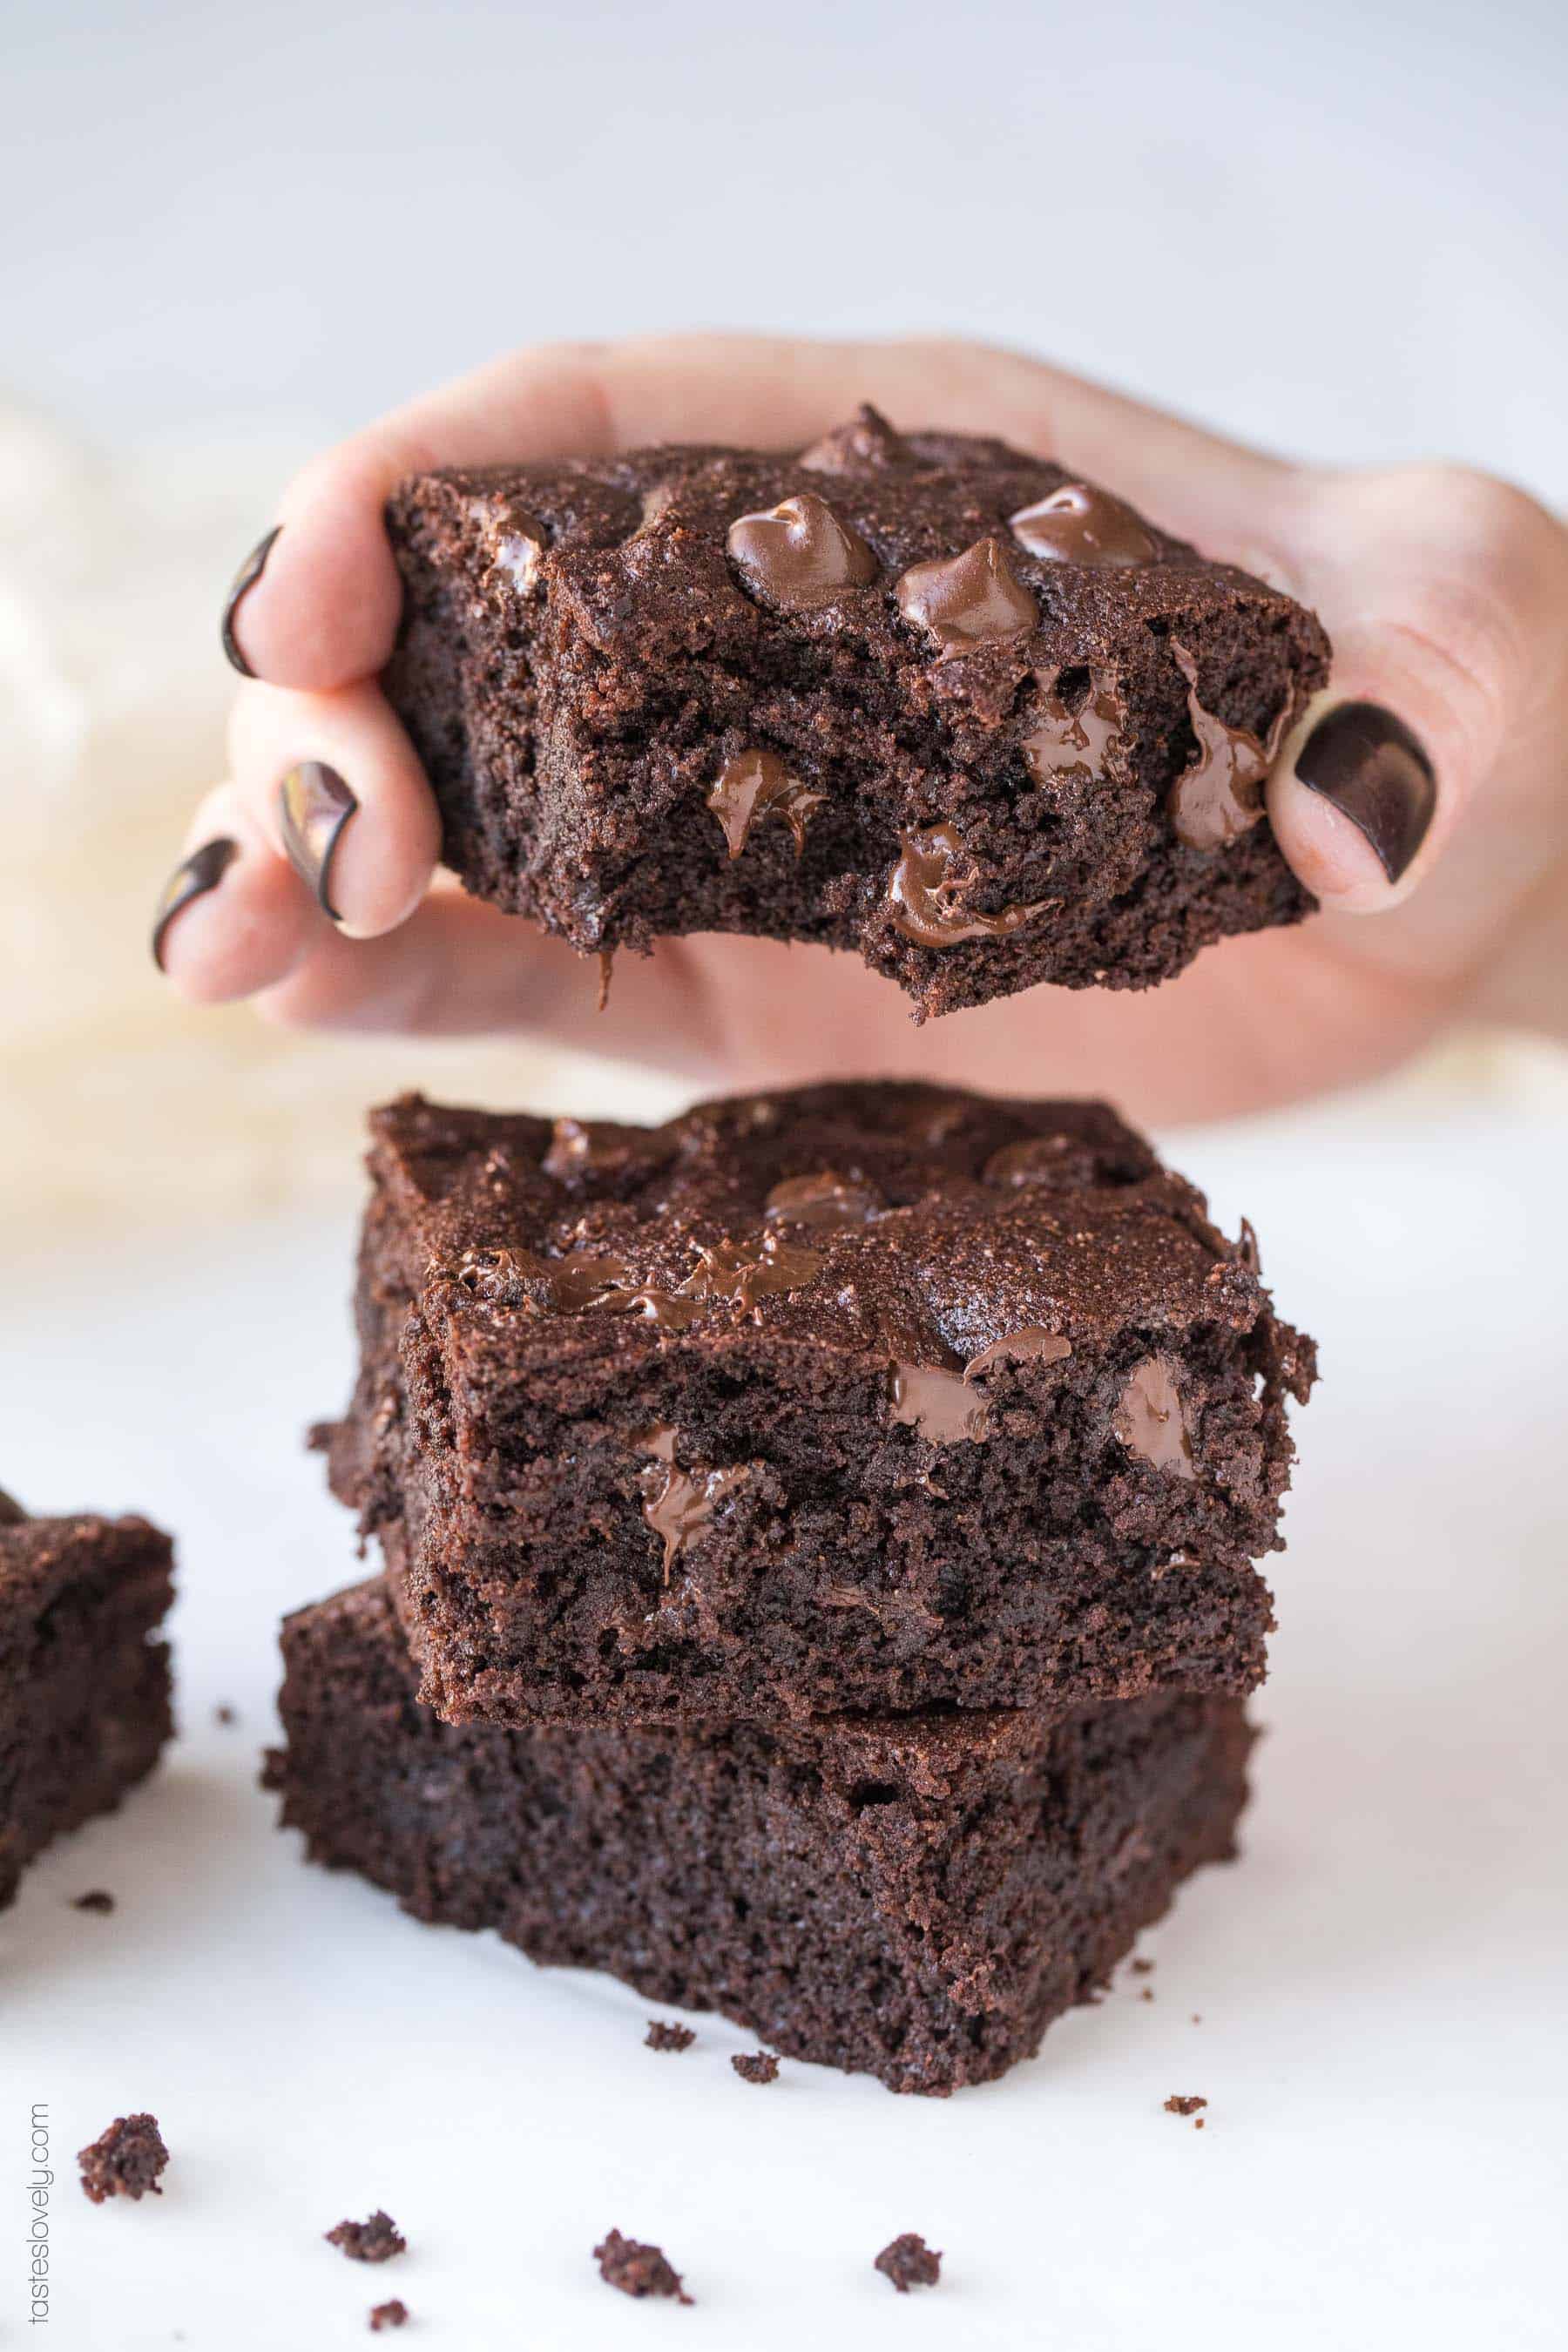 a hand holding a low carb, fudgy chocolate brownies with gooey chocolate chips with a bite taken out